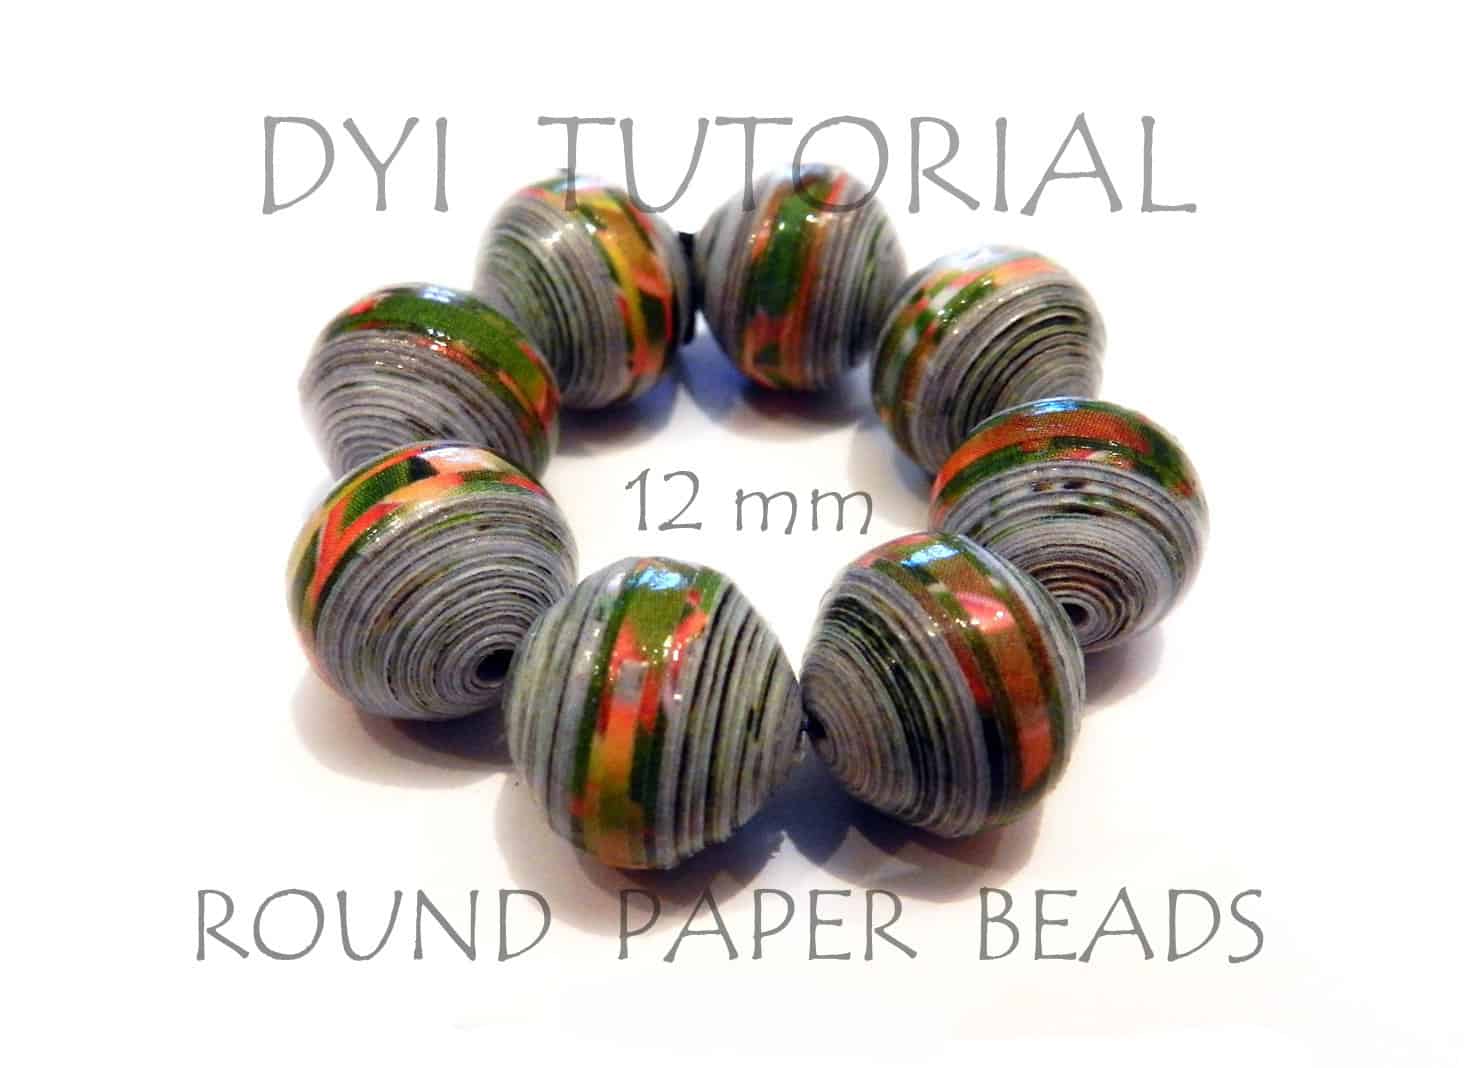 Round paper beads from magazine pages